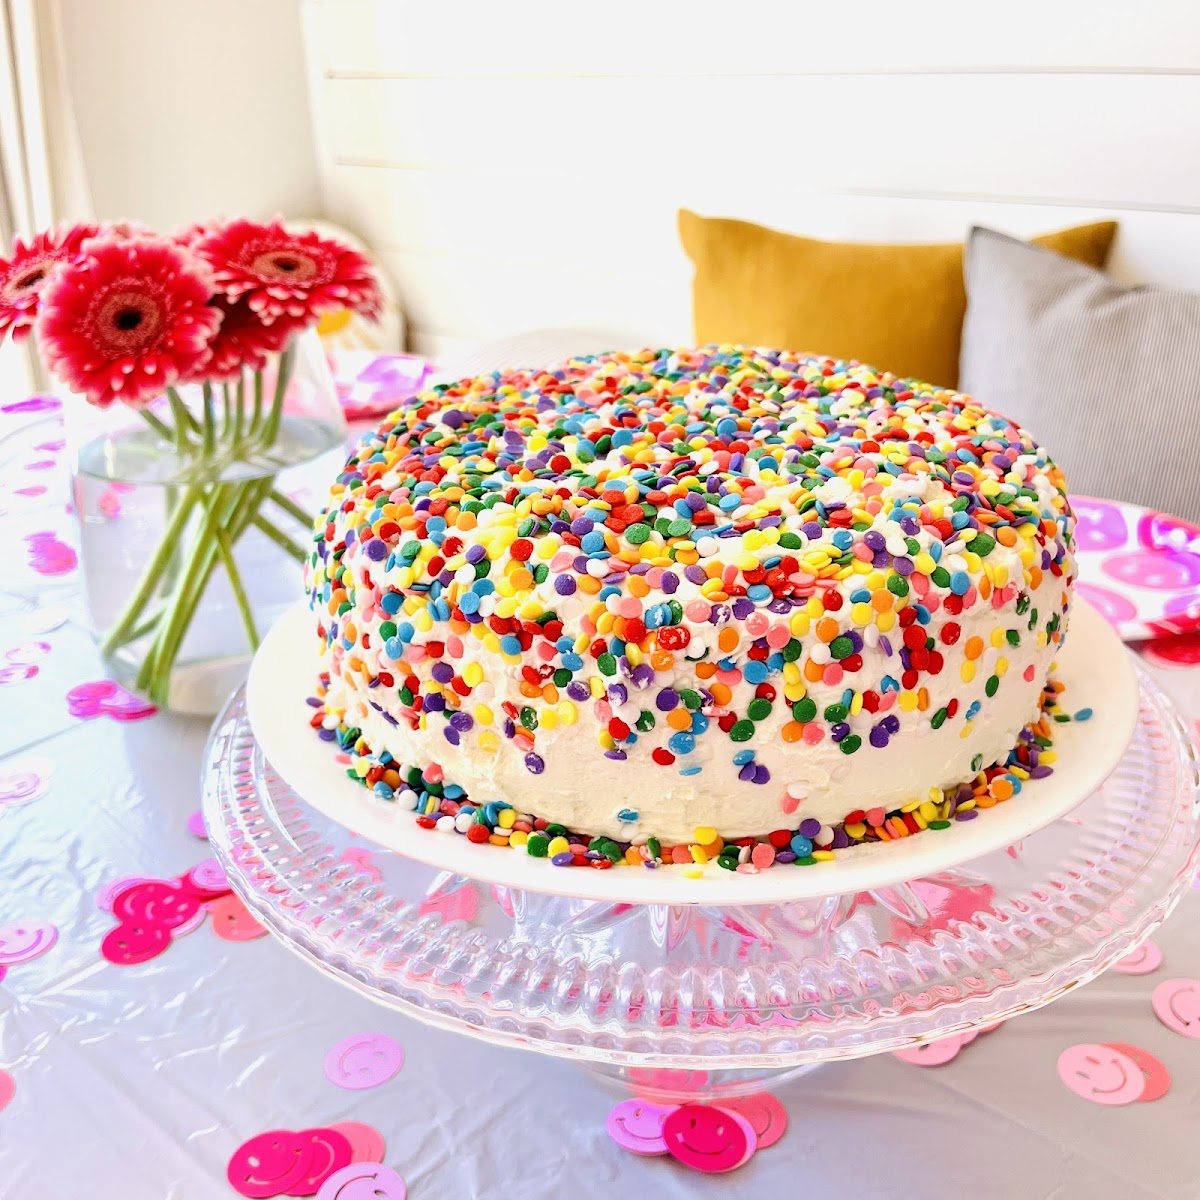 3 layer 9" Vanilla Cake with cherry filling, almond "buttercream" frosting, and sprinkles. Gluten, dairy, soy free.